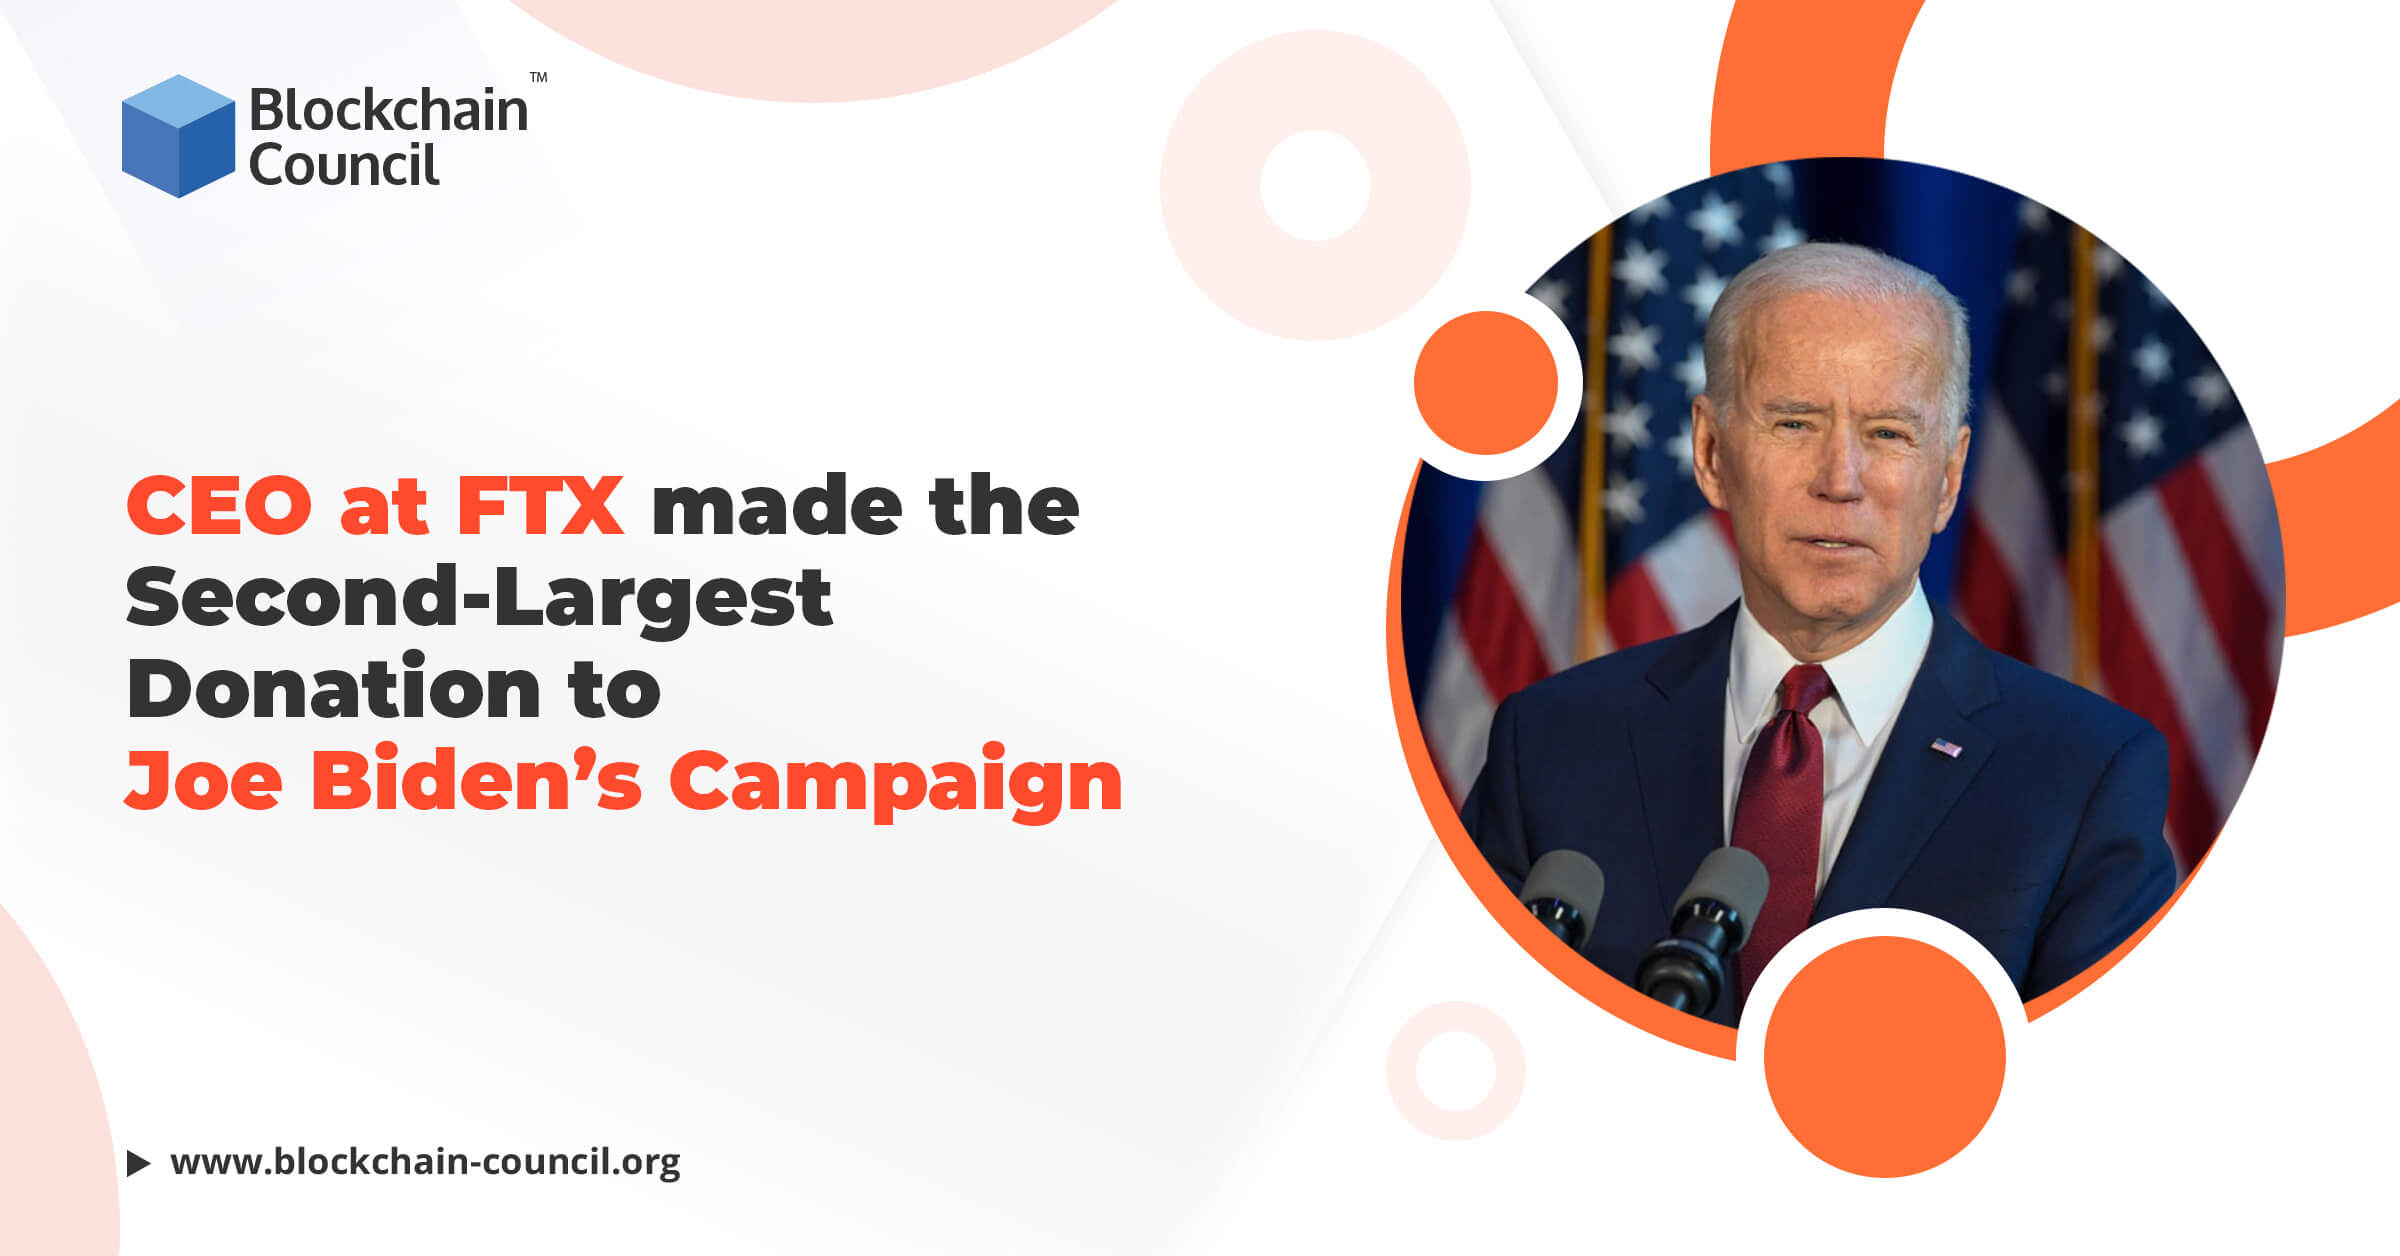 Second-Largest Donation to Joe Biden’s Campaign